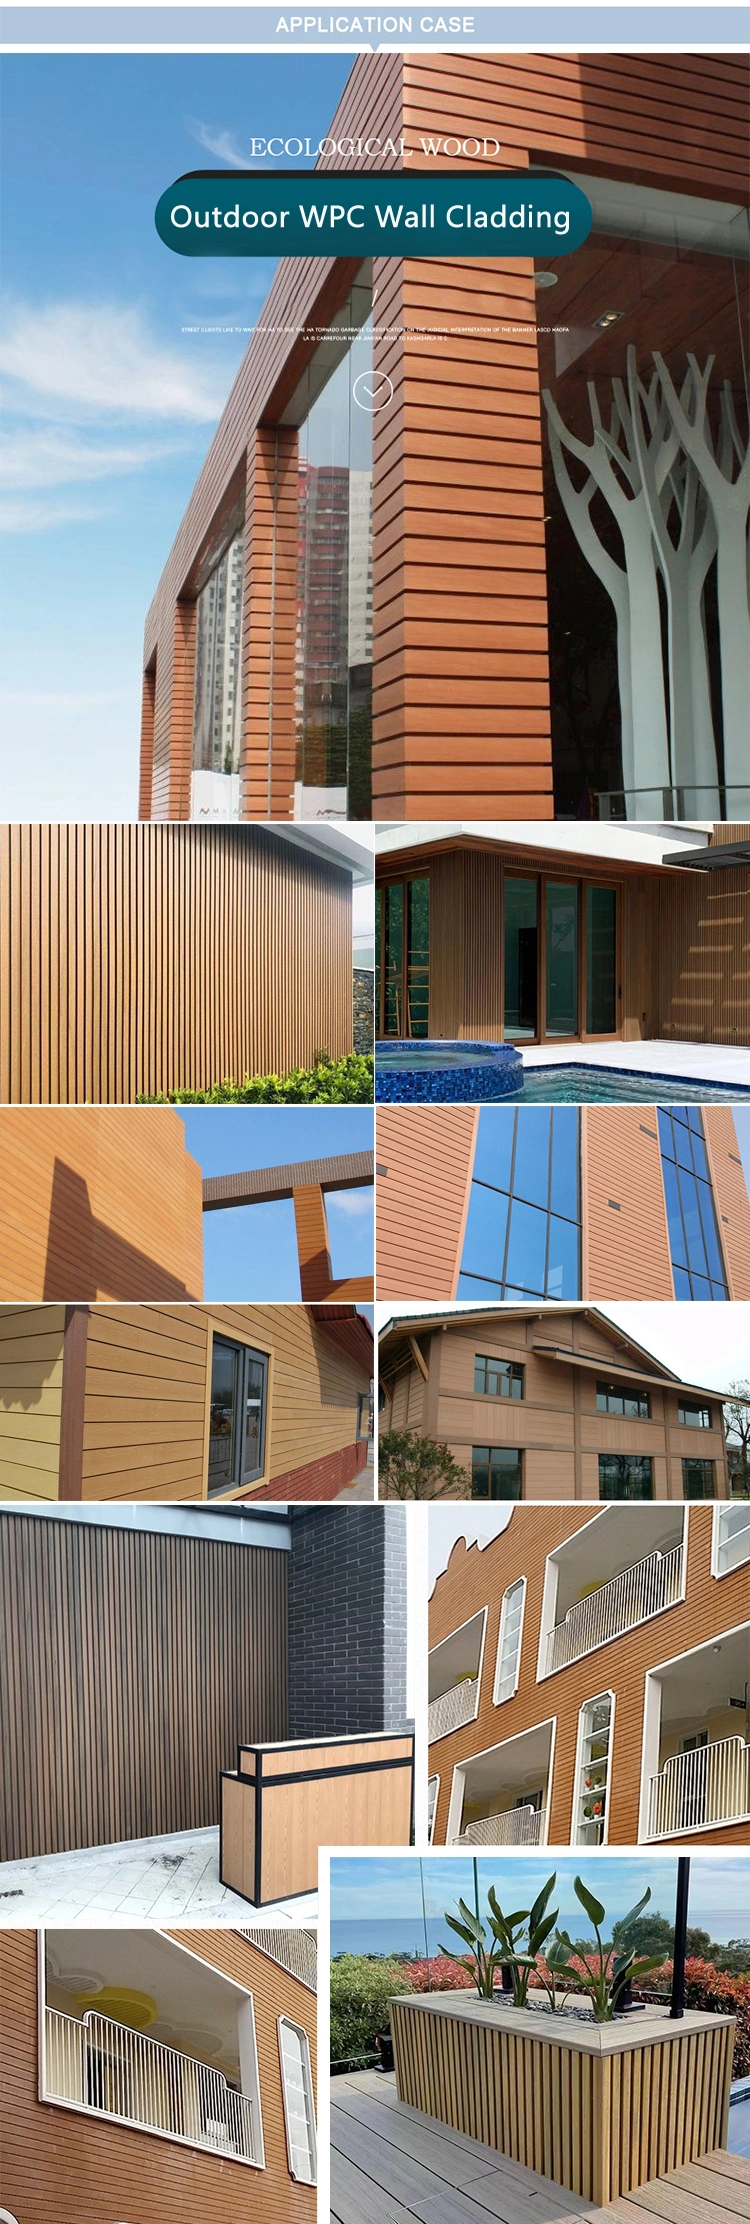 Cheap Price Engineering Wooden Wall Panels Outdoor WPC Wall Cladding